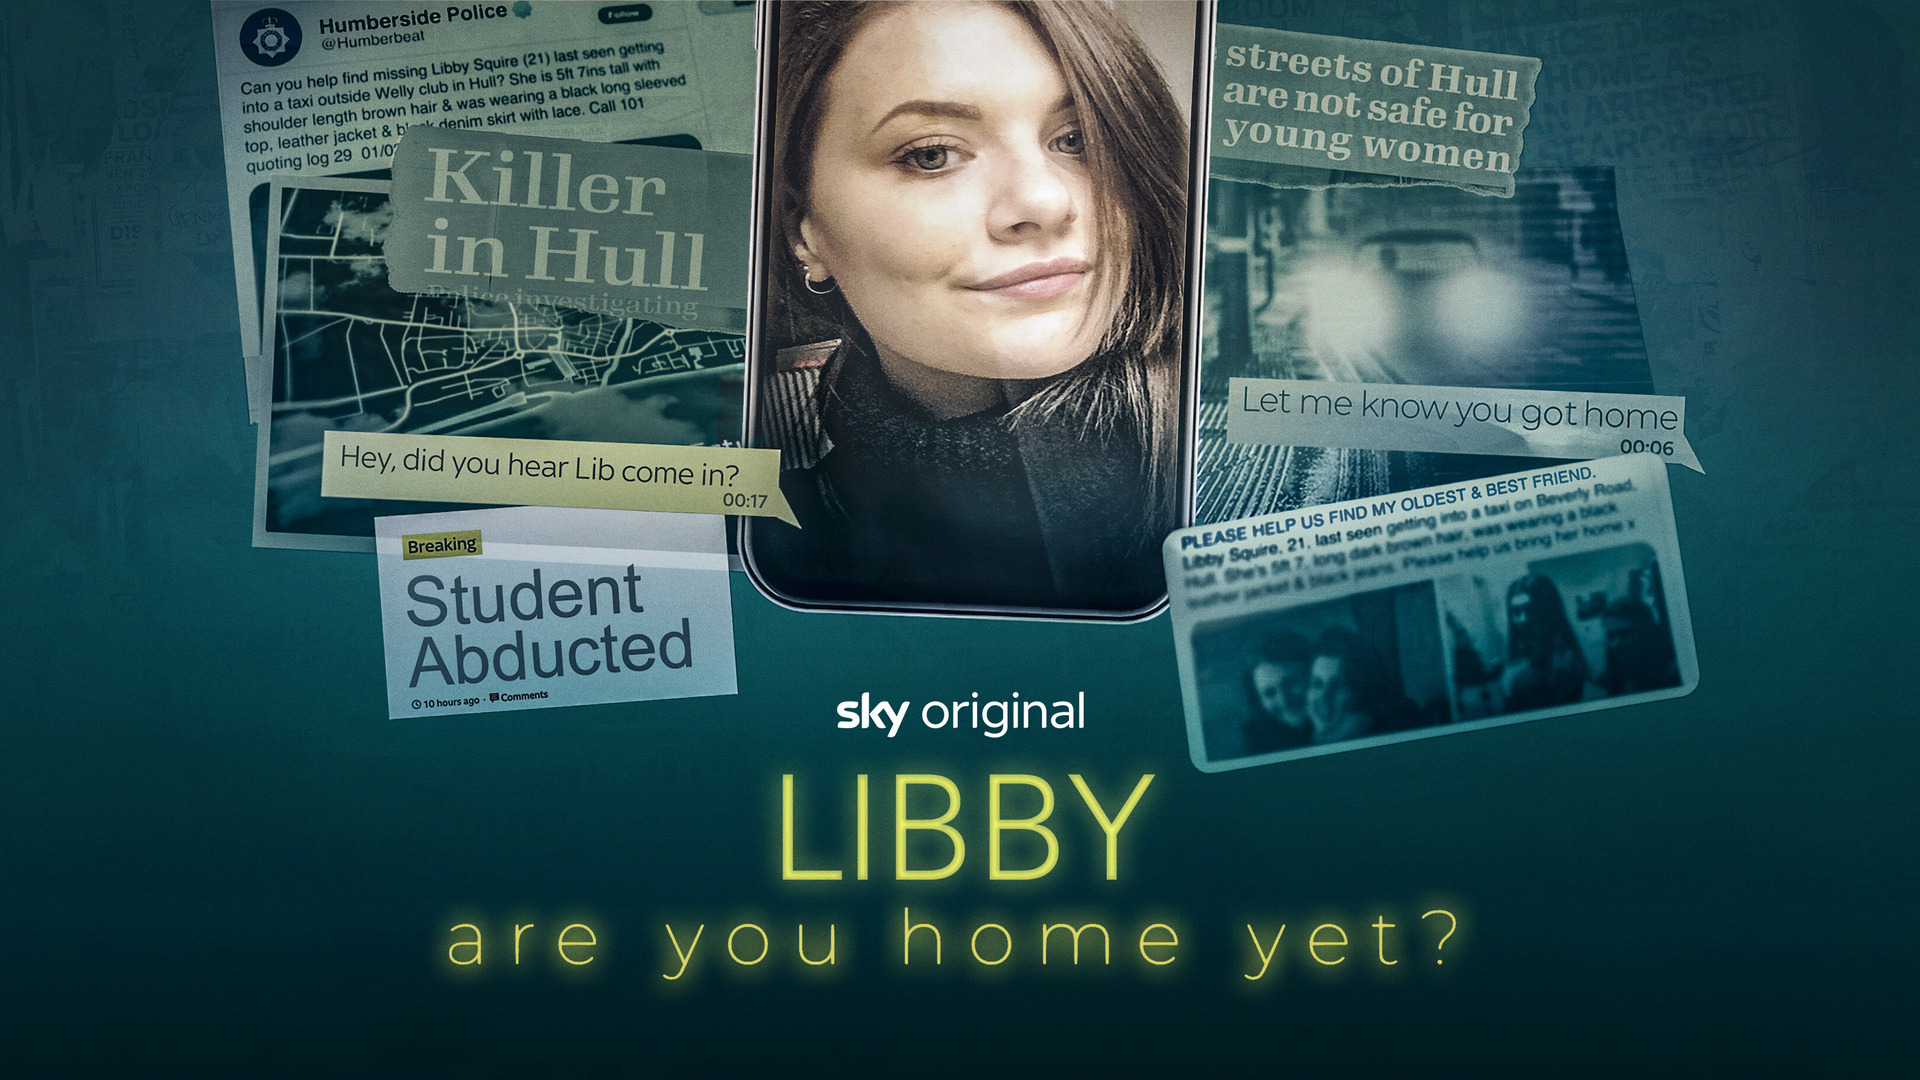 Show Libby, Are You Home Yet?